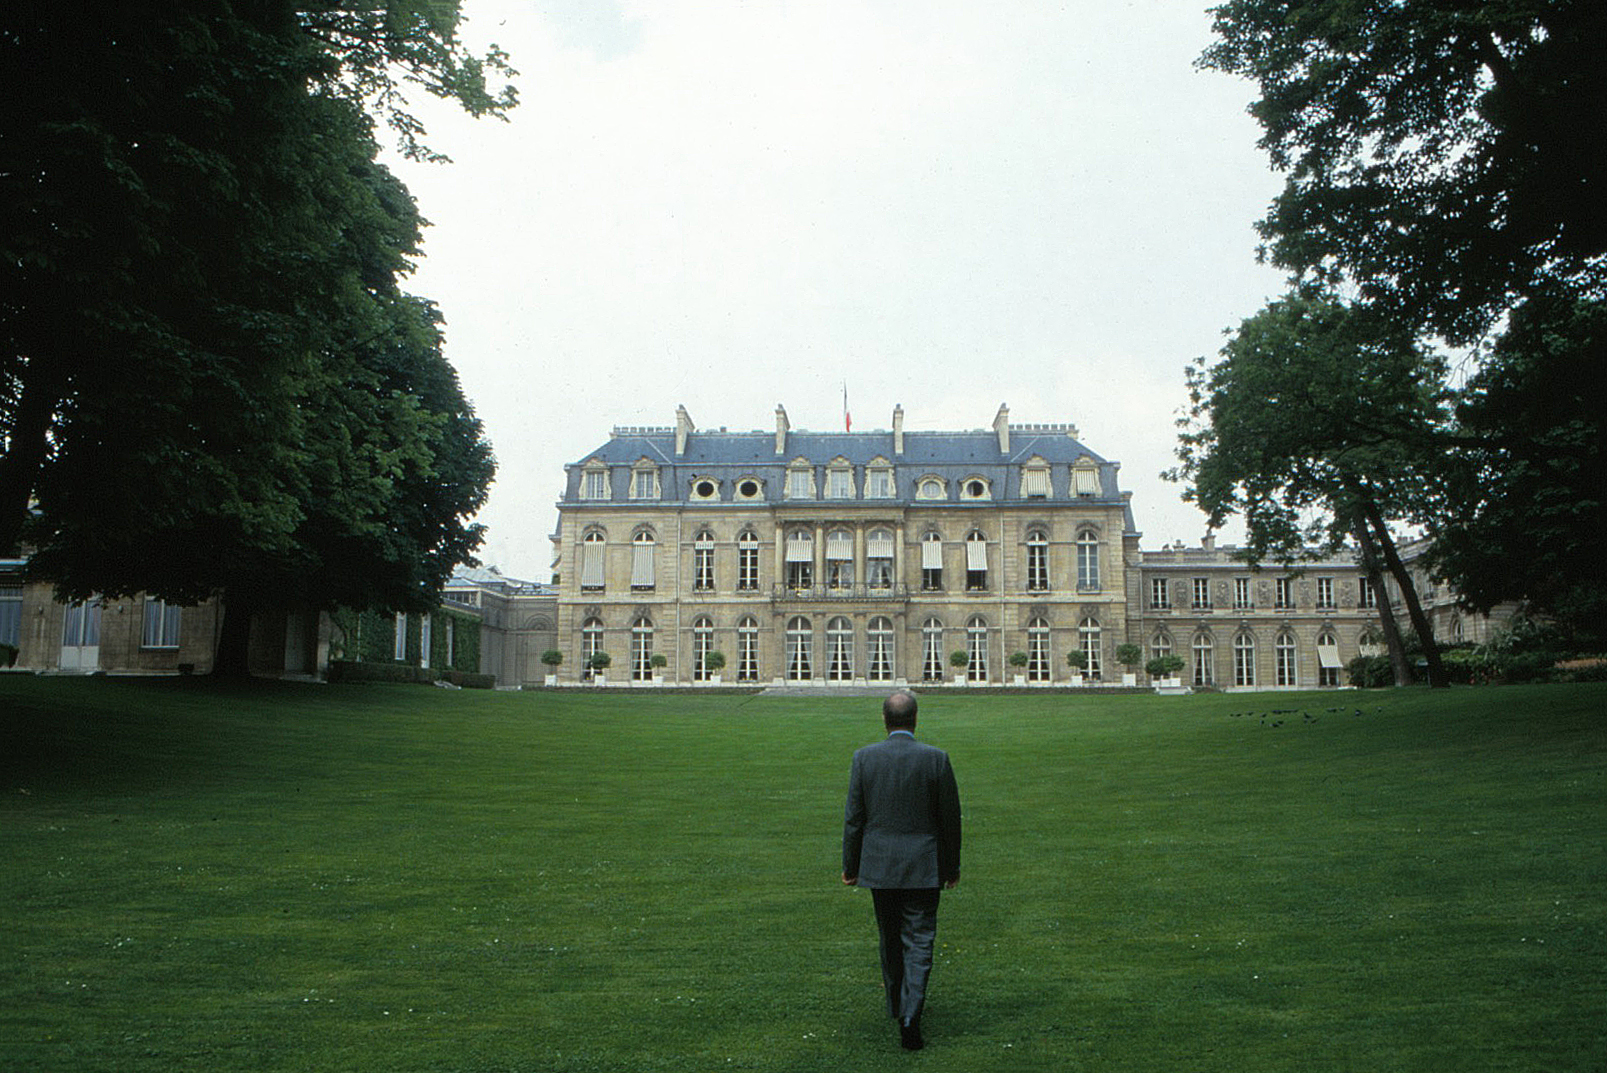  President MItterrand at the Elysee Palace gardens 